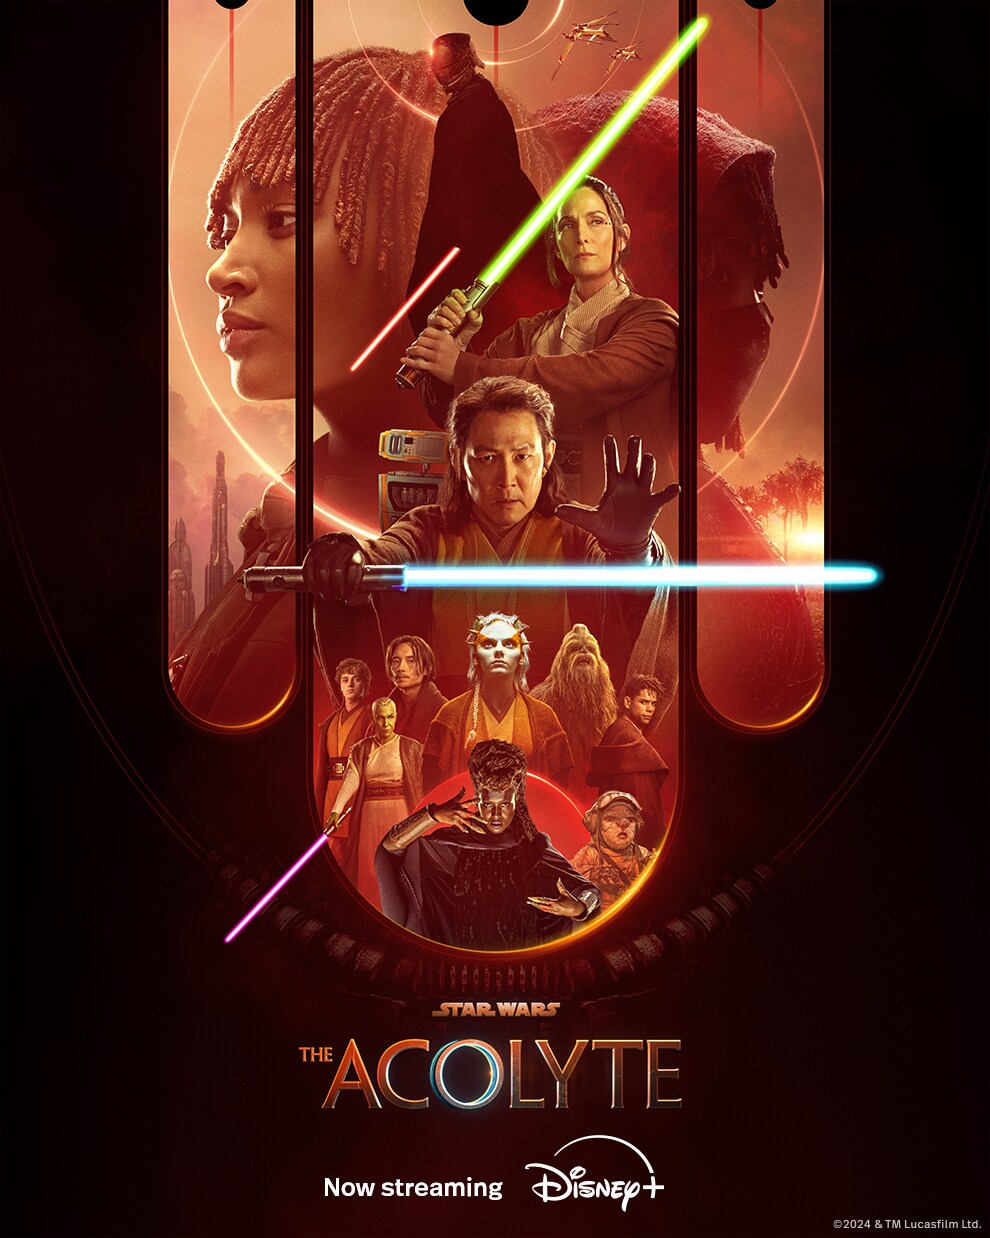 The Acolyte key art poster